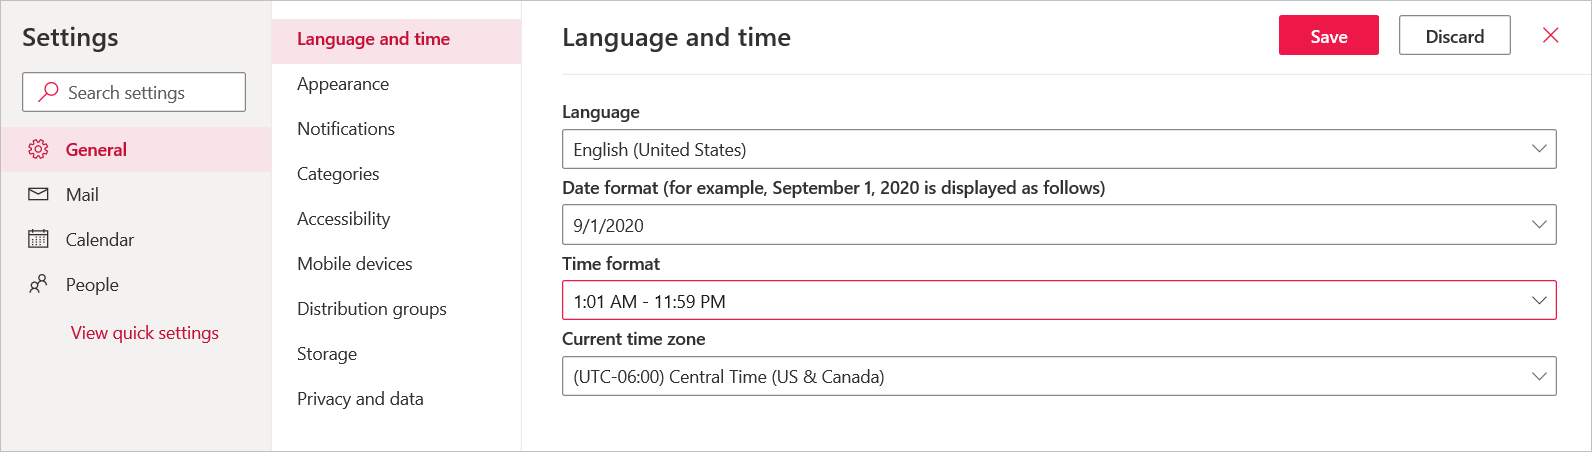 general language and time